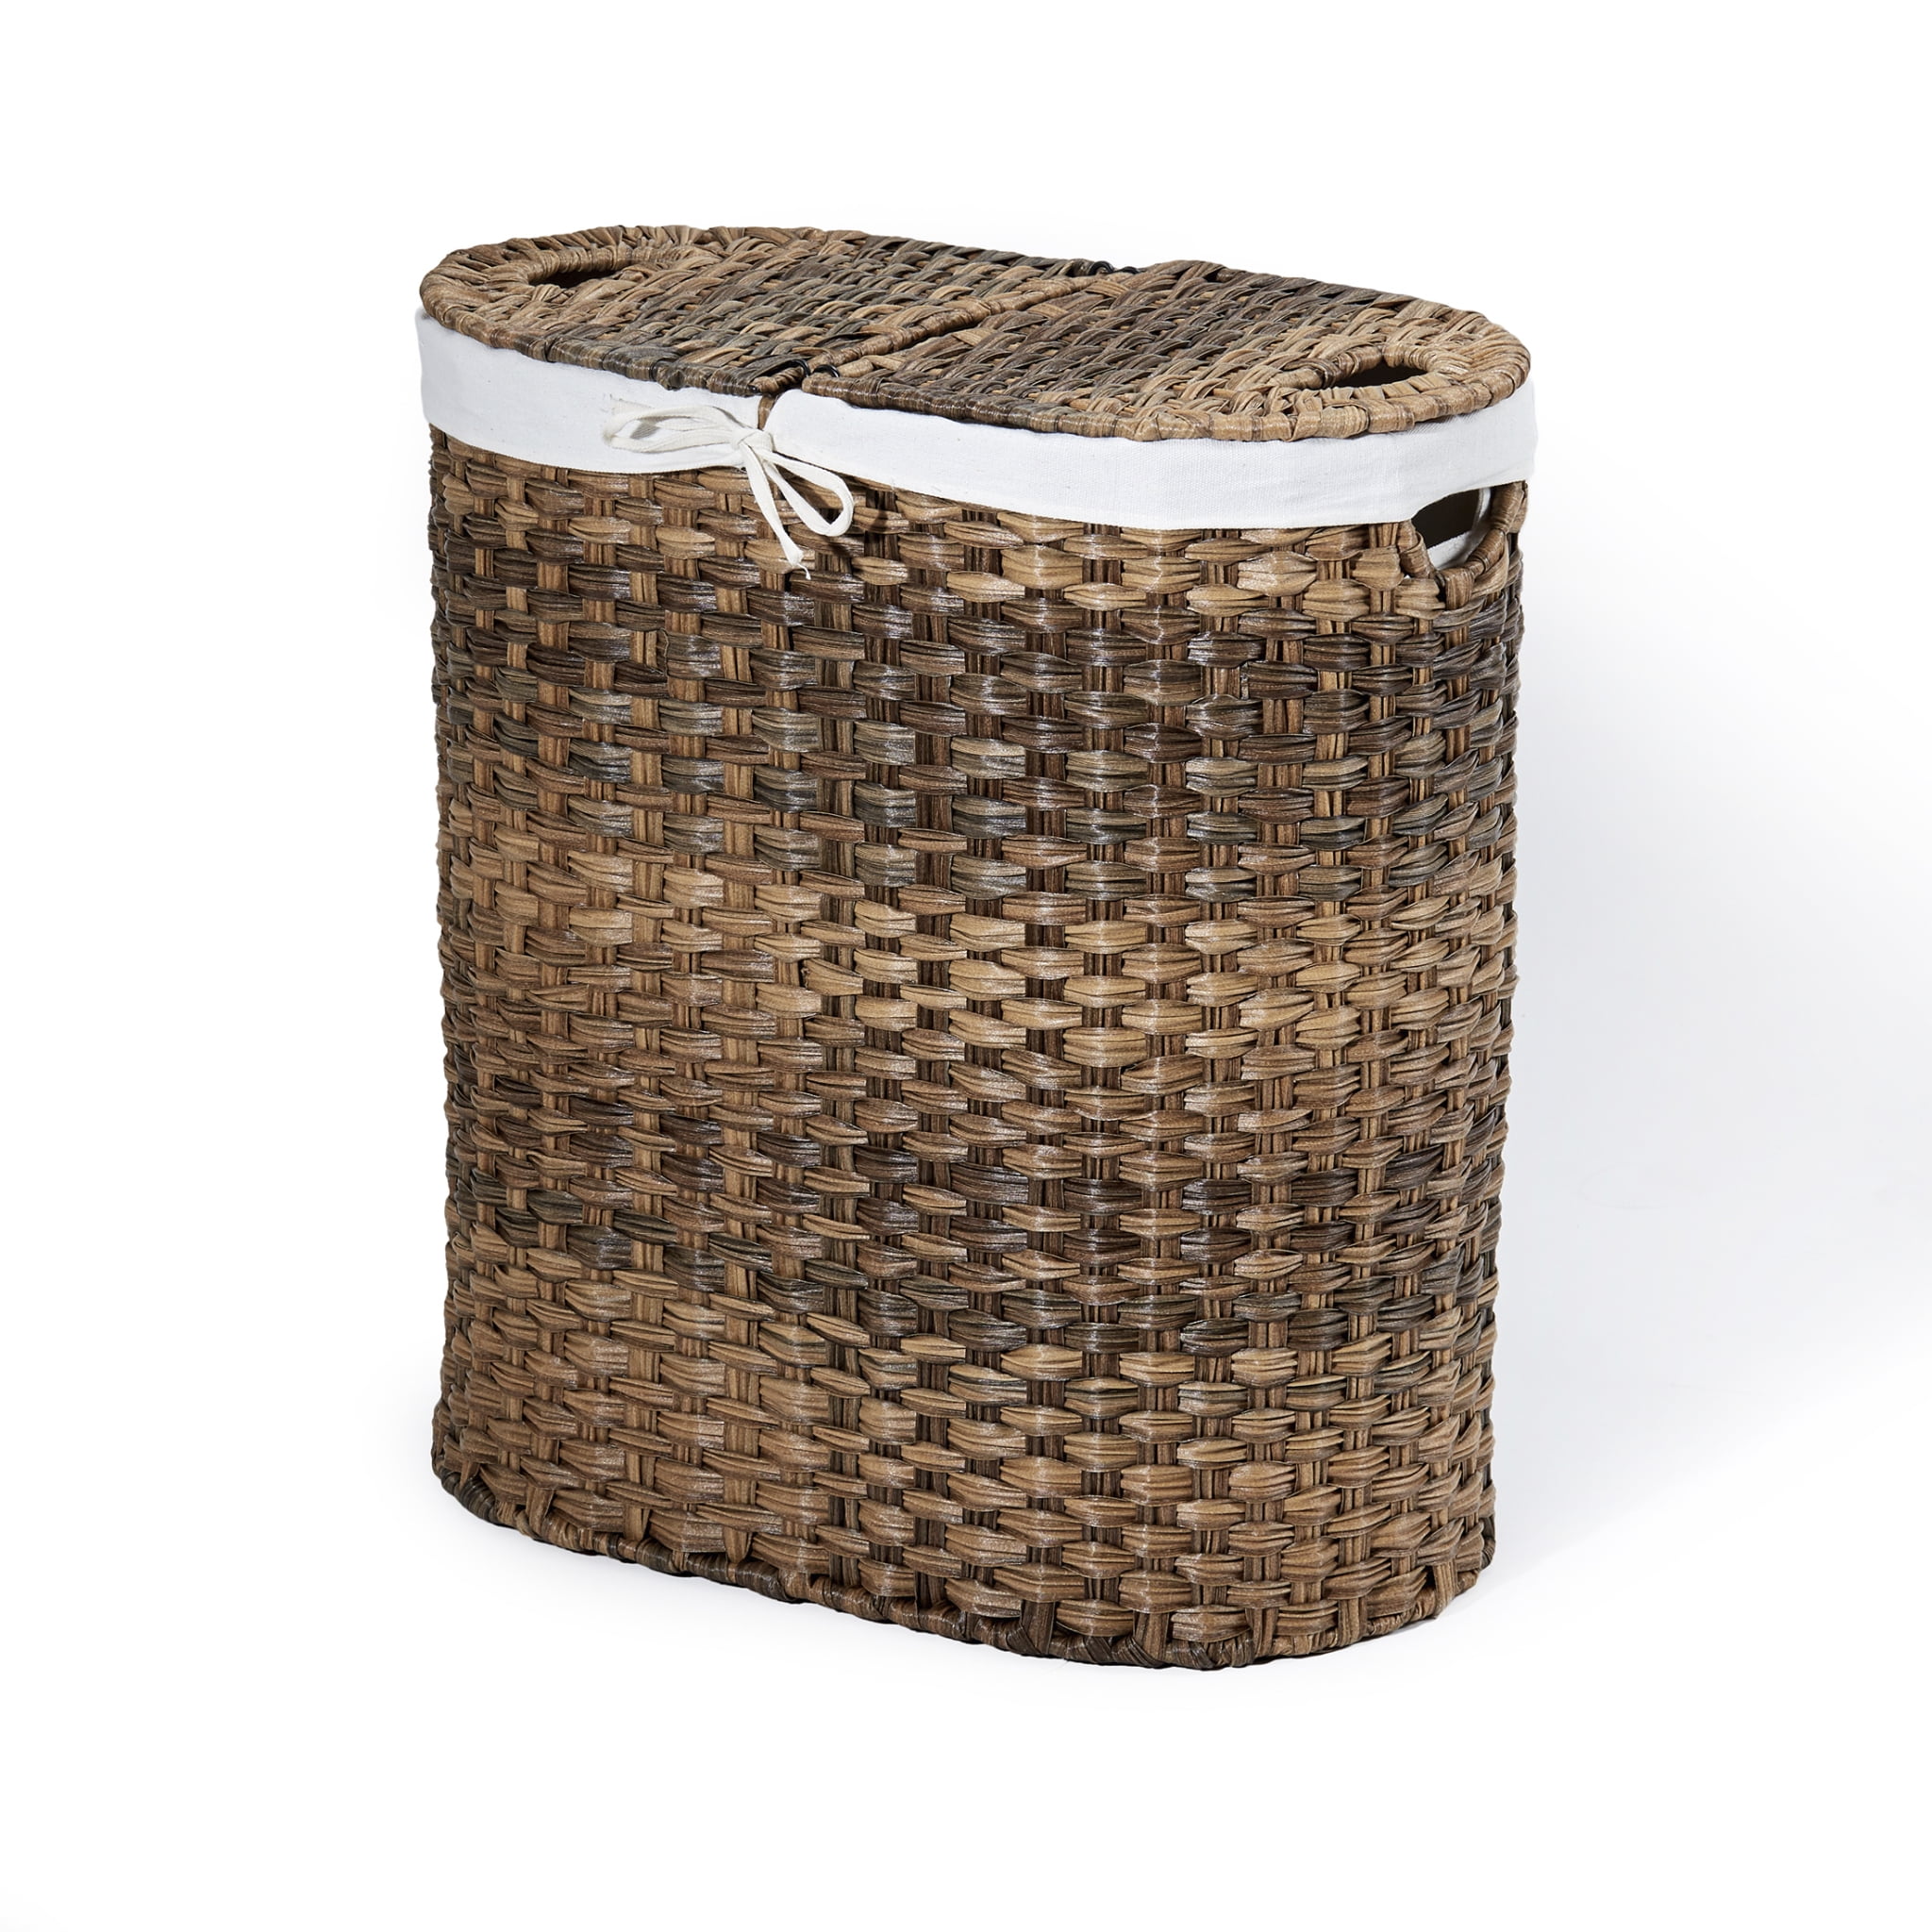 BROWN WHITE BLACK OVAL WICKER LAUNDRY BASKET WITH LID & REMOVABLE COTTON LINING 